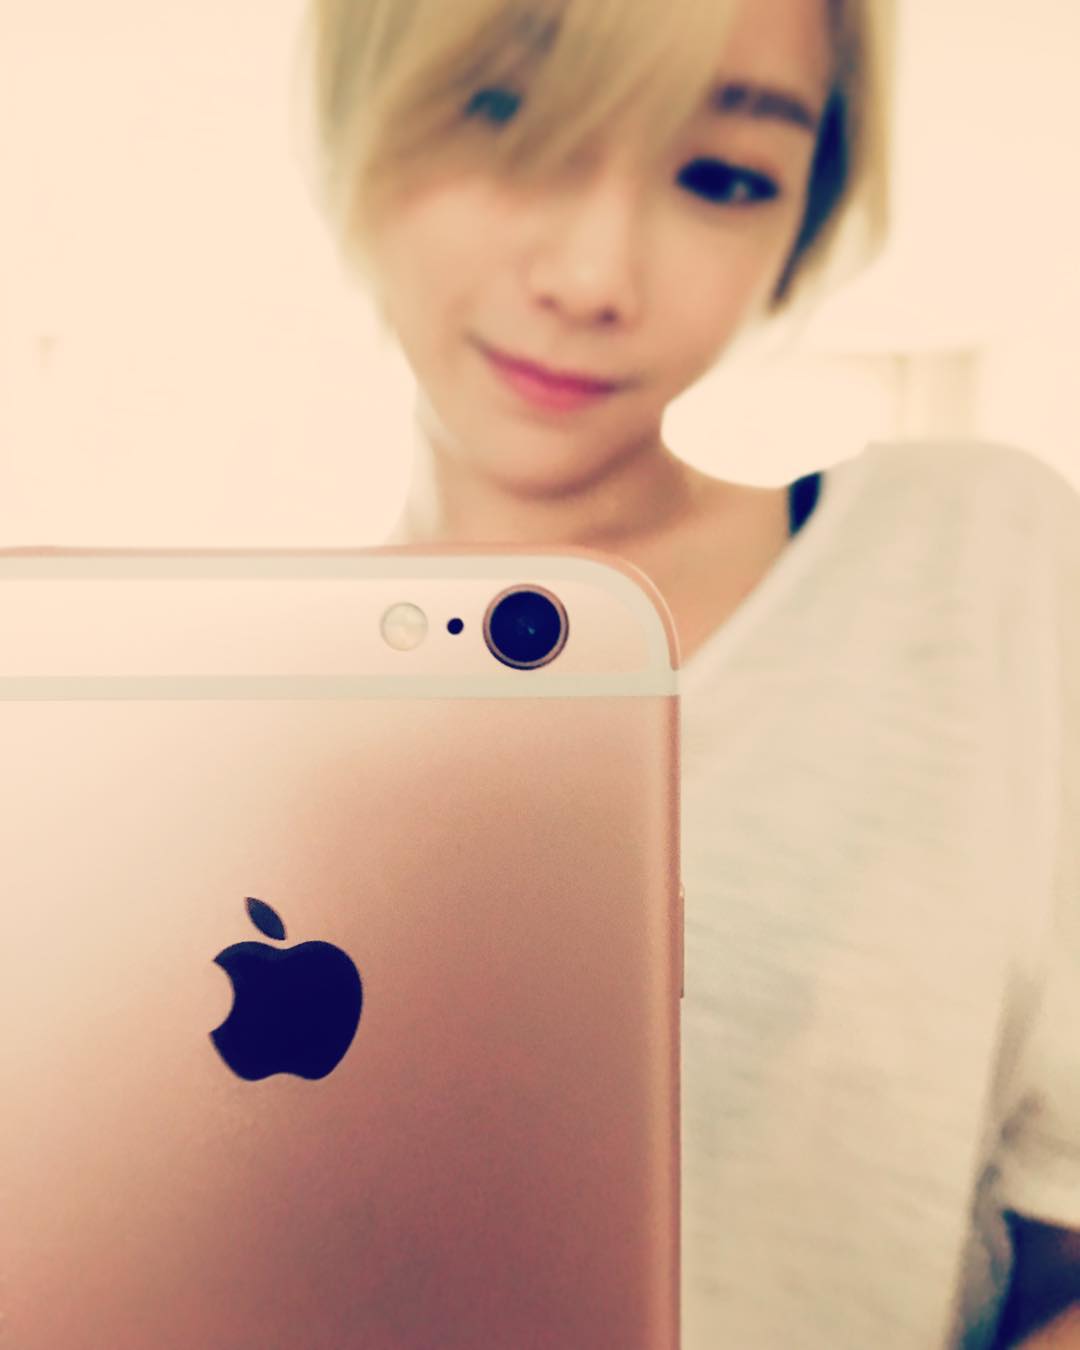 SNSD TaeYeon snap a pretty selfie with her iPhone Wonderful